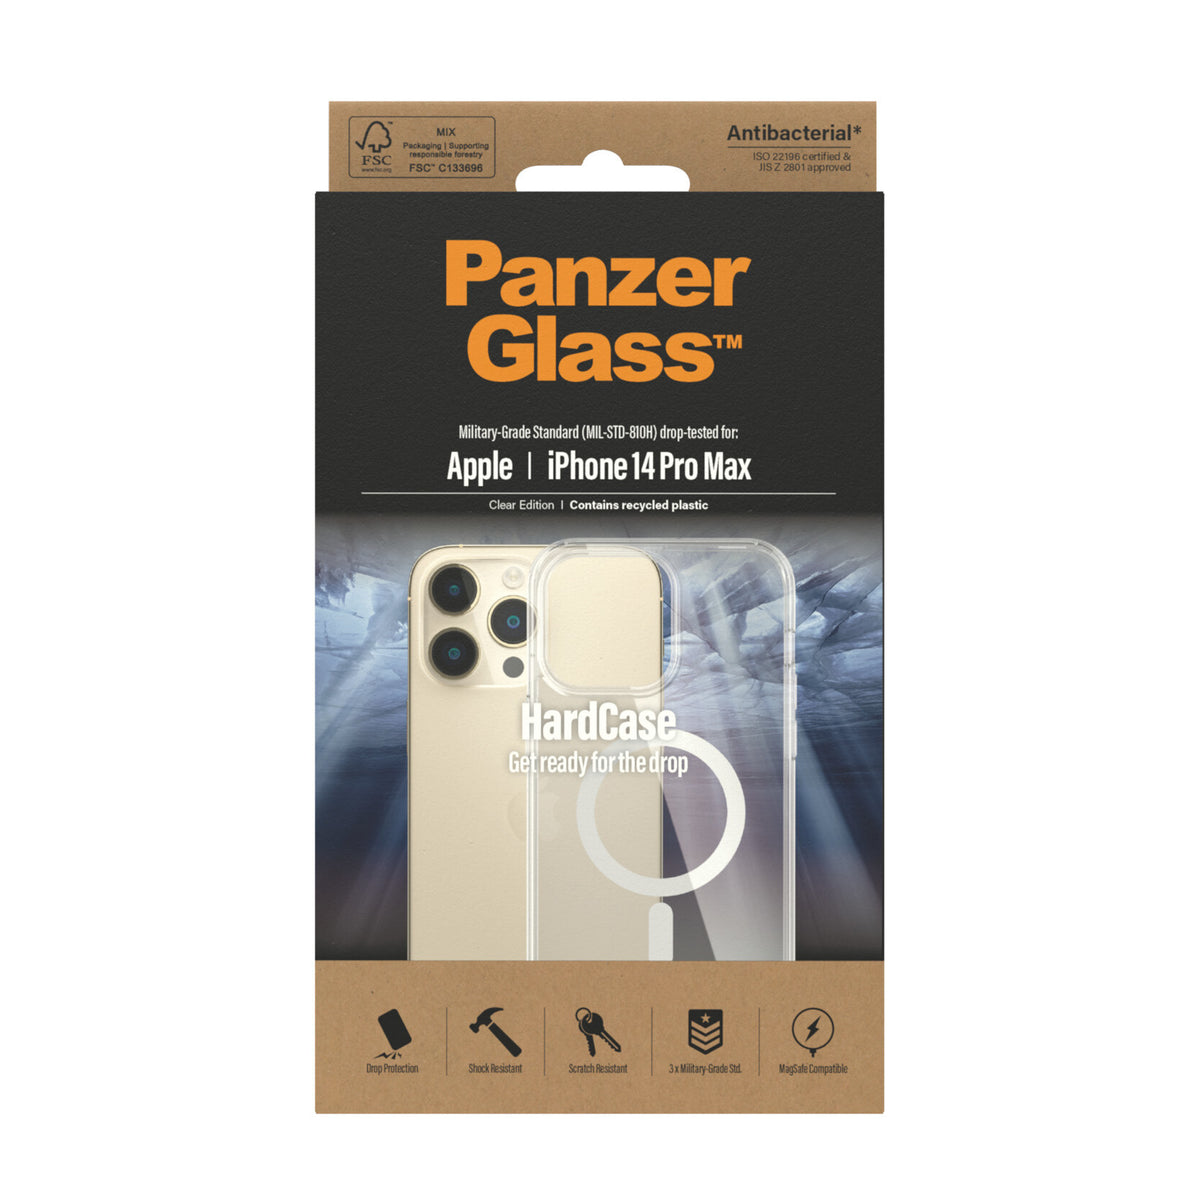 PanzerGlass ® HardCase for iPhone 14 Pro Max in Clear